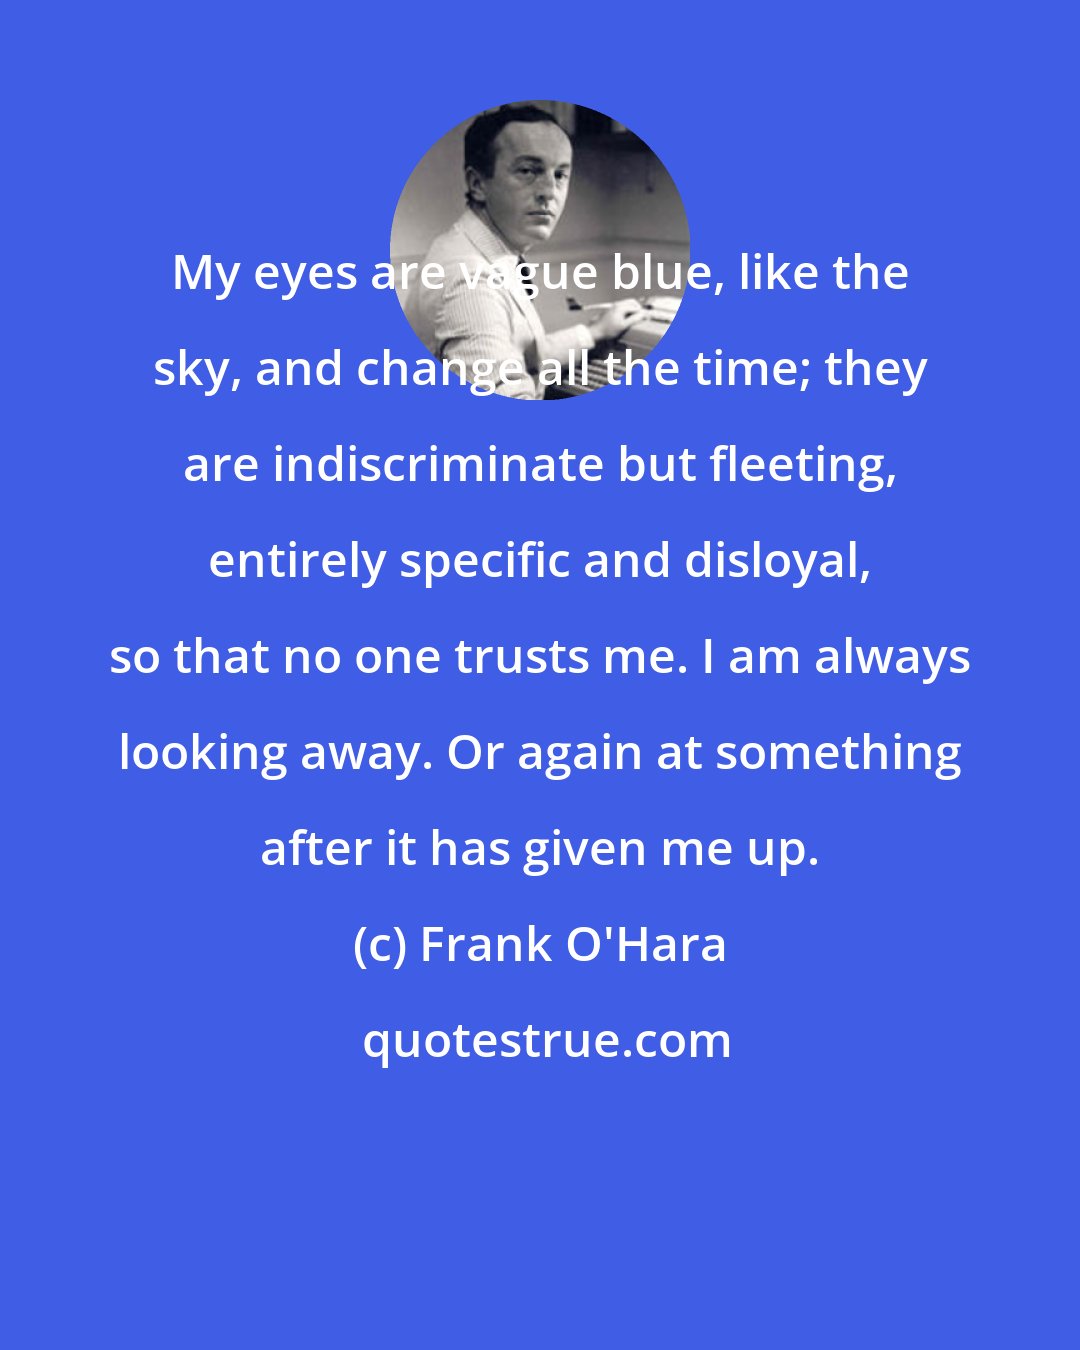 Frank O'Hara: My eyes are vague blue, like the sky, and change all the time; they are indiscriminate but fleeting, entirely specific and disloyal, so that no one trusts me. I am always looking away. Or again at something after it has given me up.